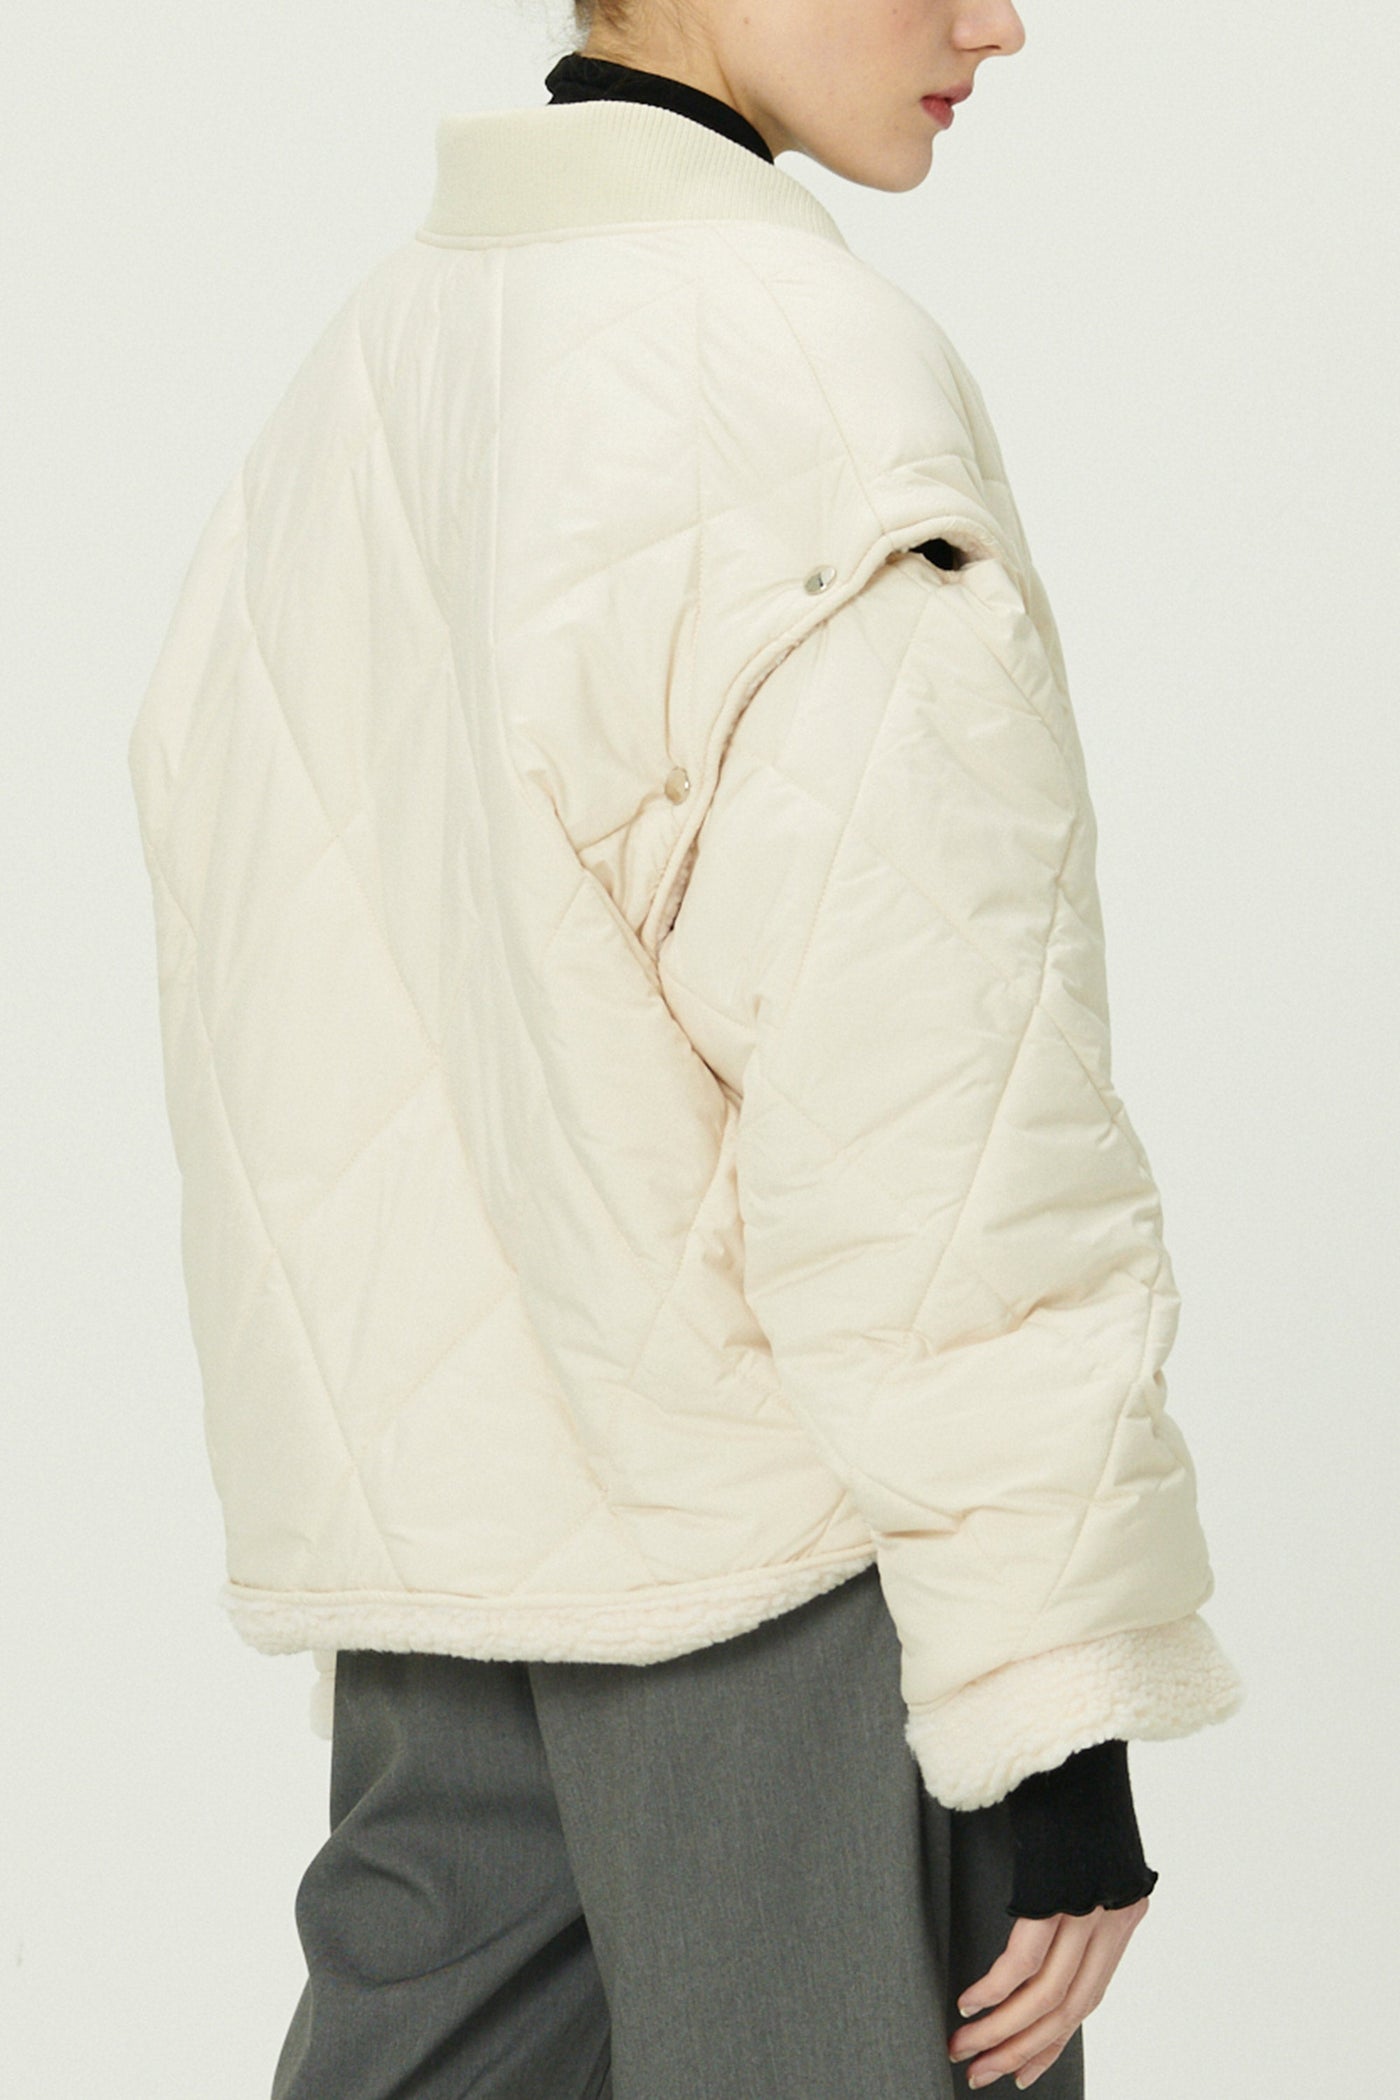 storets.com Eileen Quilted Sherpa Coat w/Detachable Sleeve